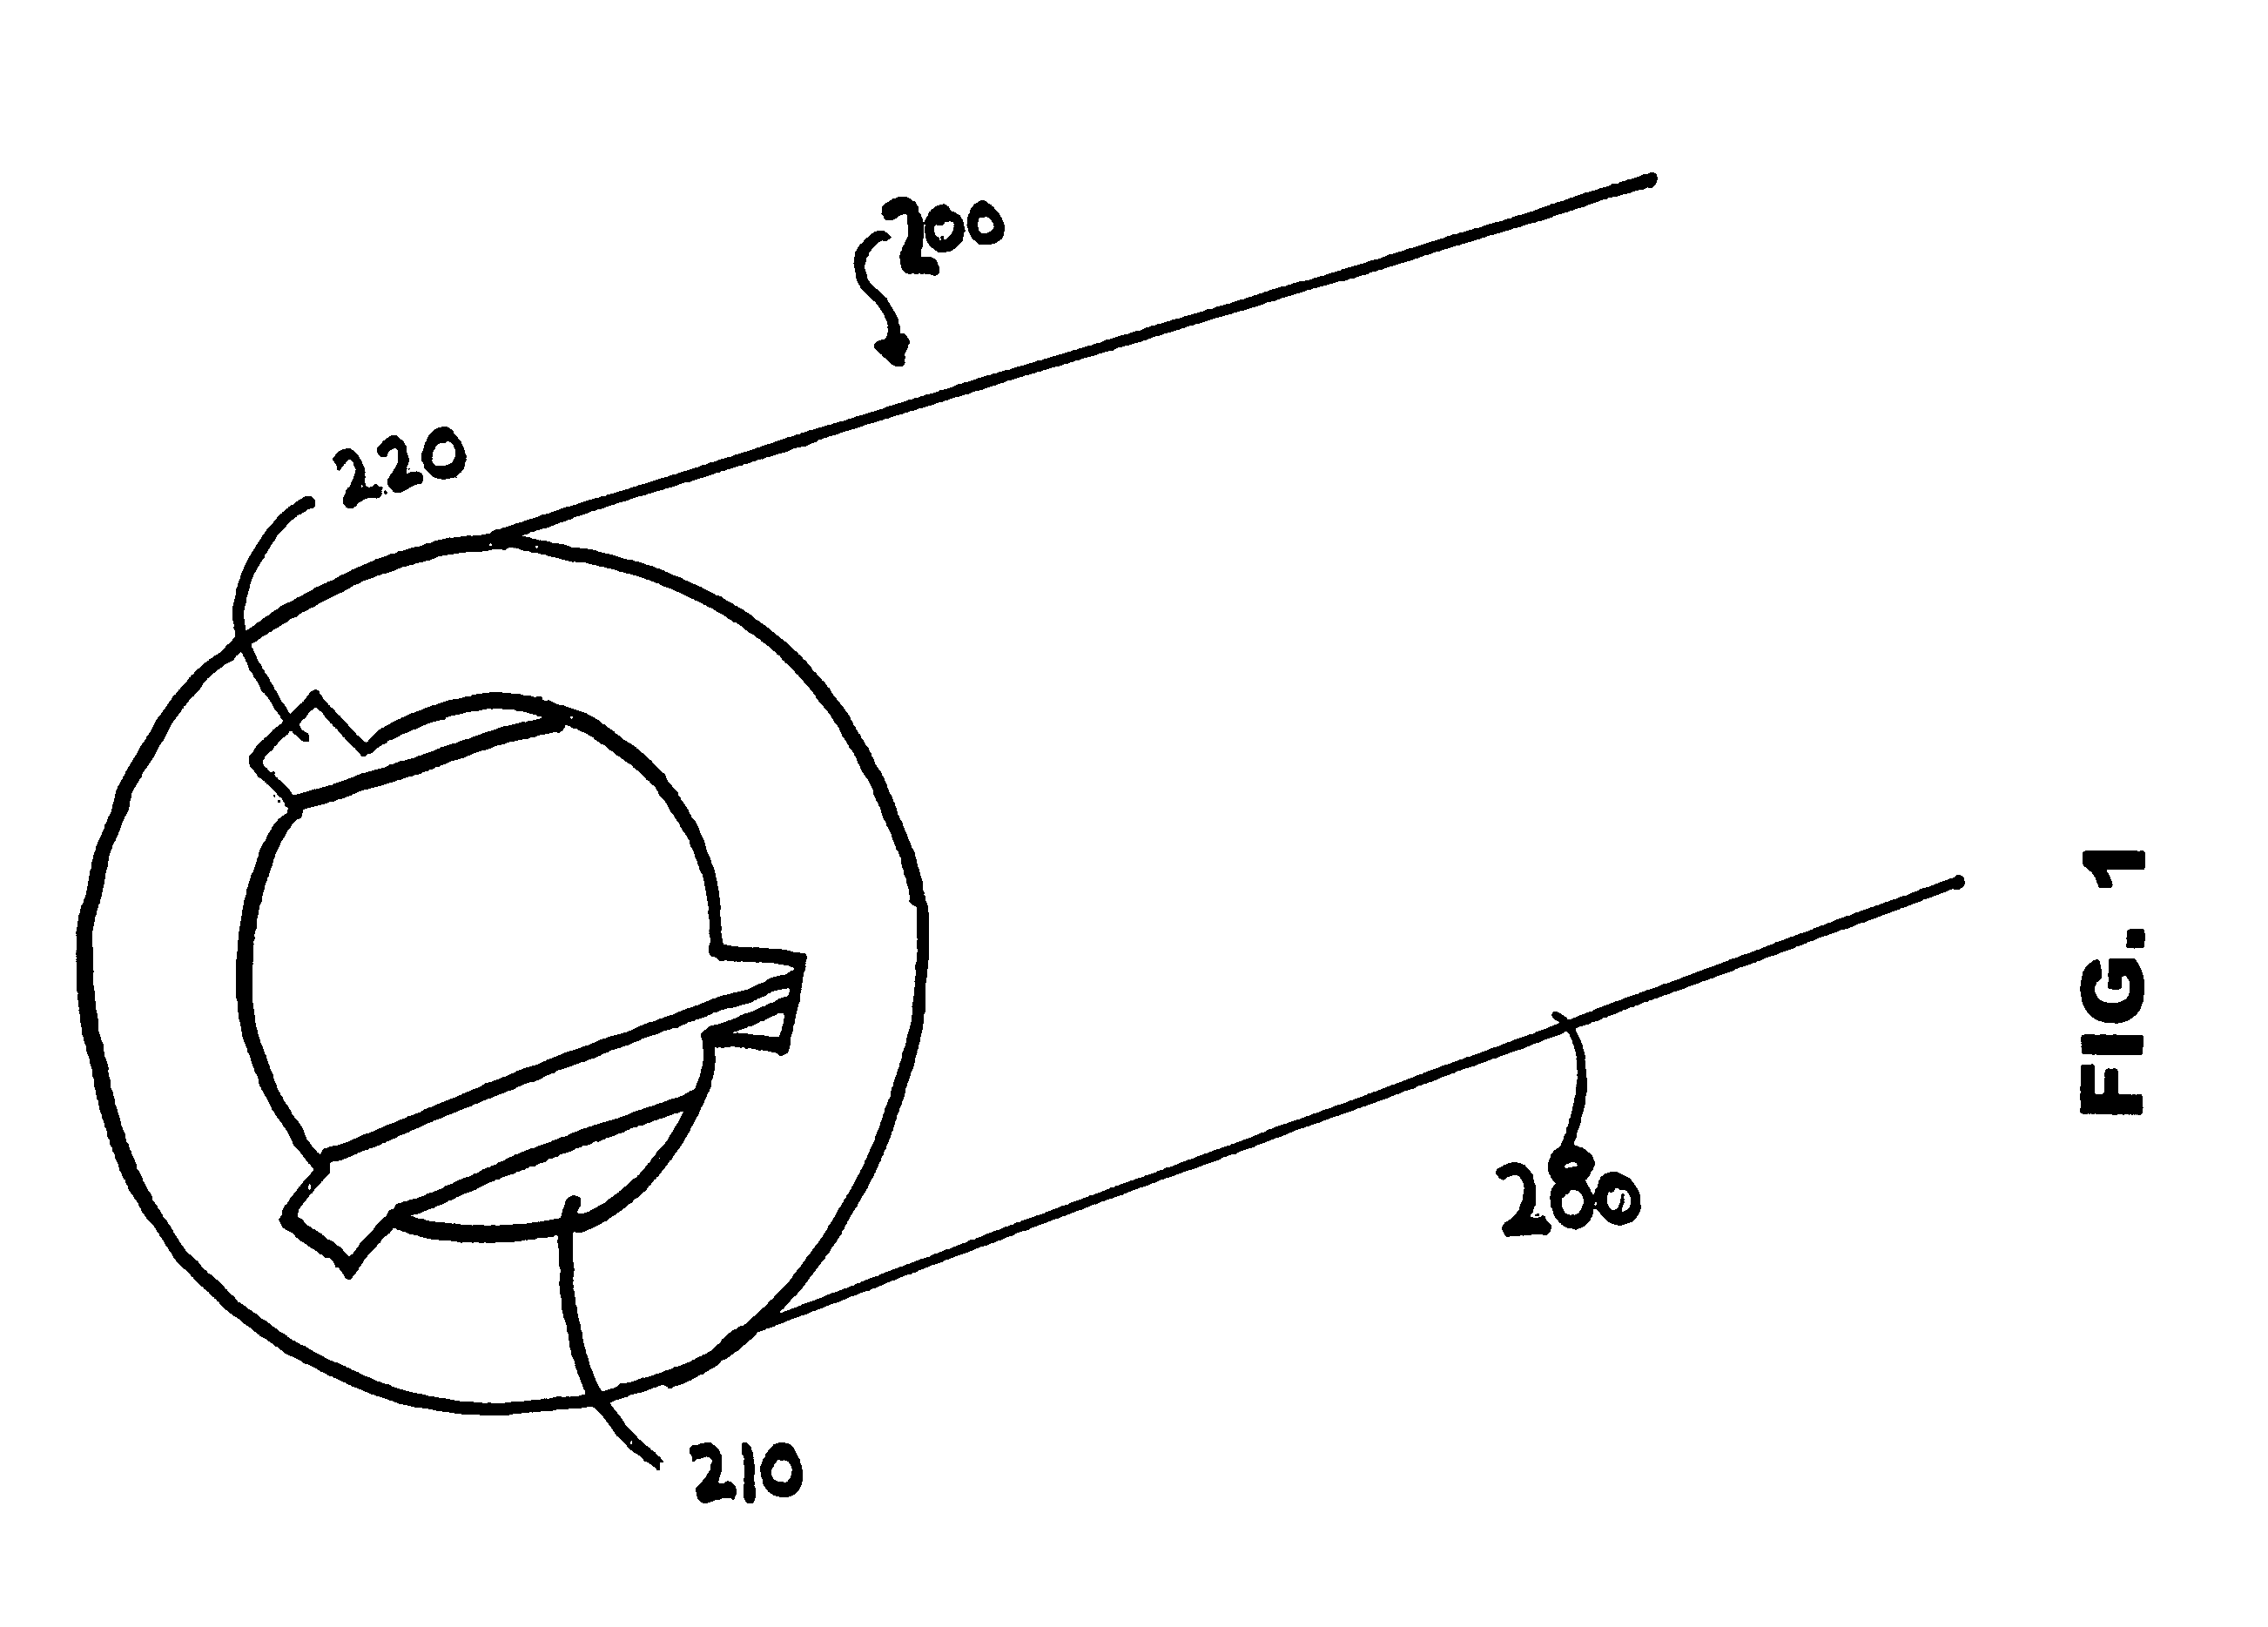 Therapeutic medical appliance delivery and method of use